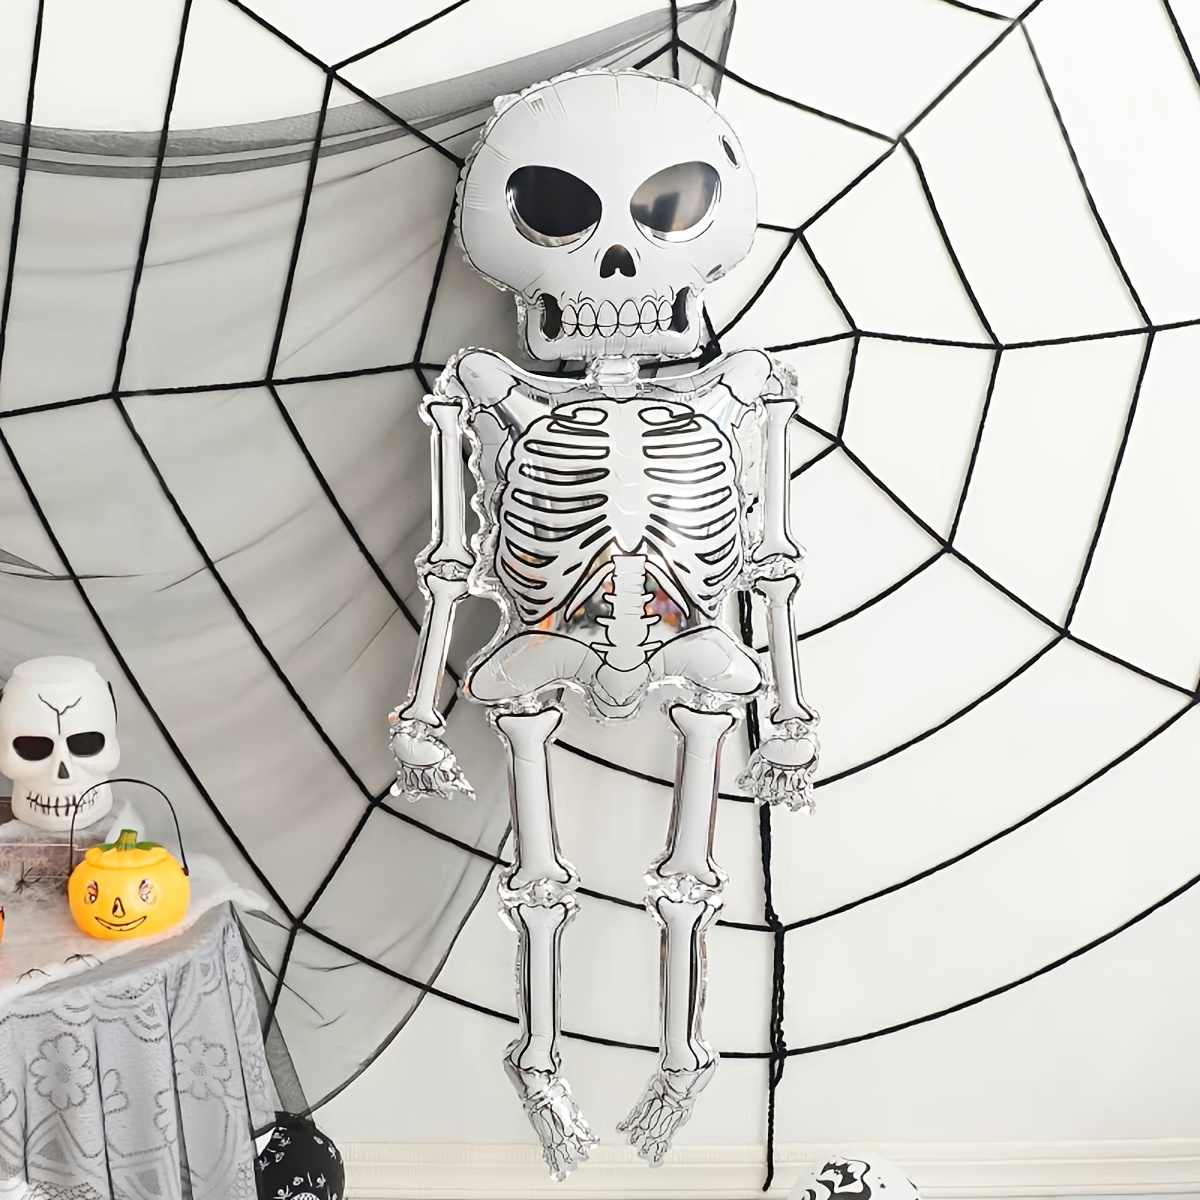 

1pc, 62-inch New Alien Skeleton Aluminum Film Balloon, Party Decoration For Halloween And Day Of The Dead, Secret Room Scene Props Haunted House Decoration